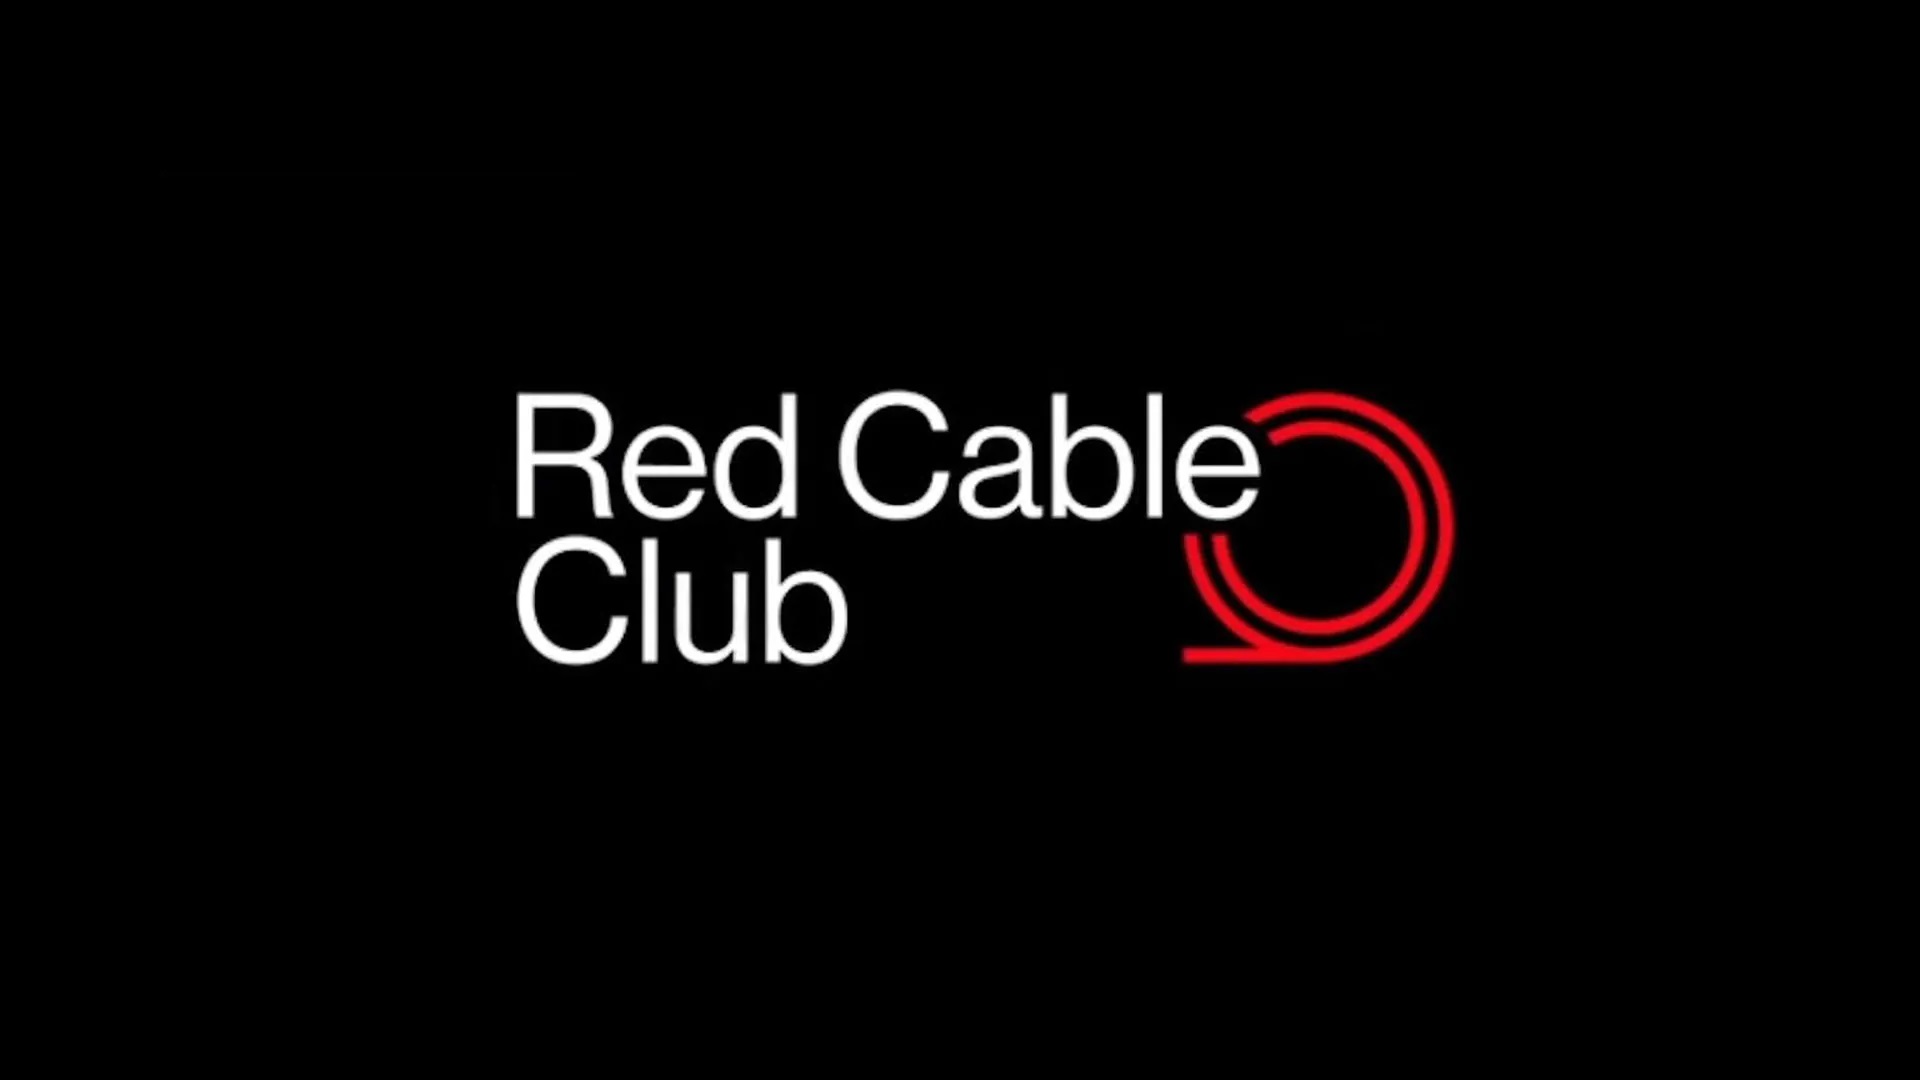 OnePlus Launches Red Cable Club In Europe With Up To 50% Discounts And Free Shipping